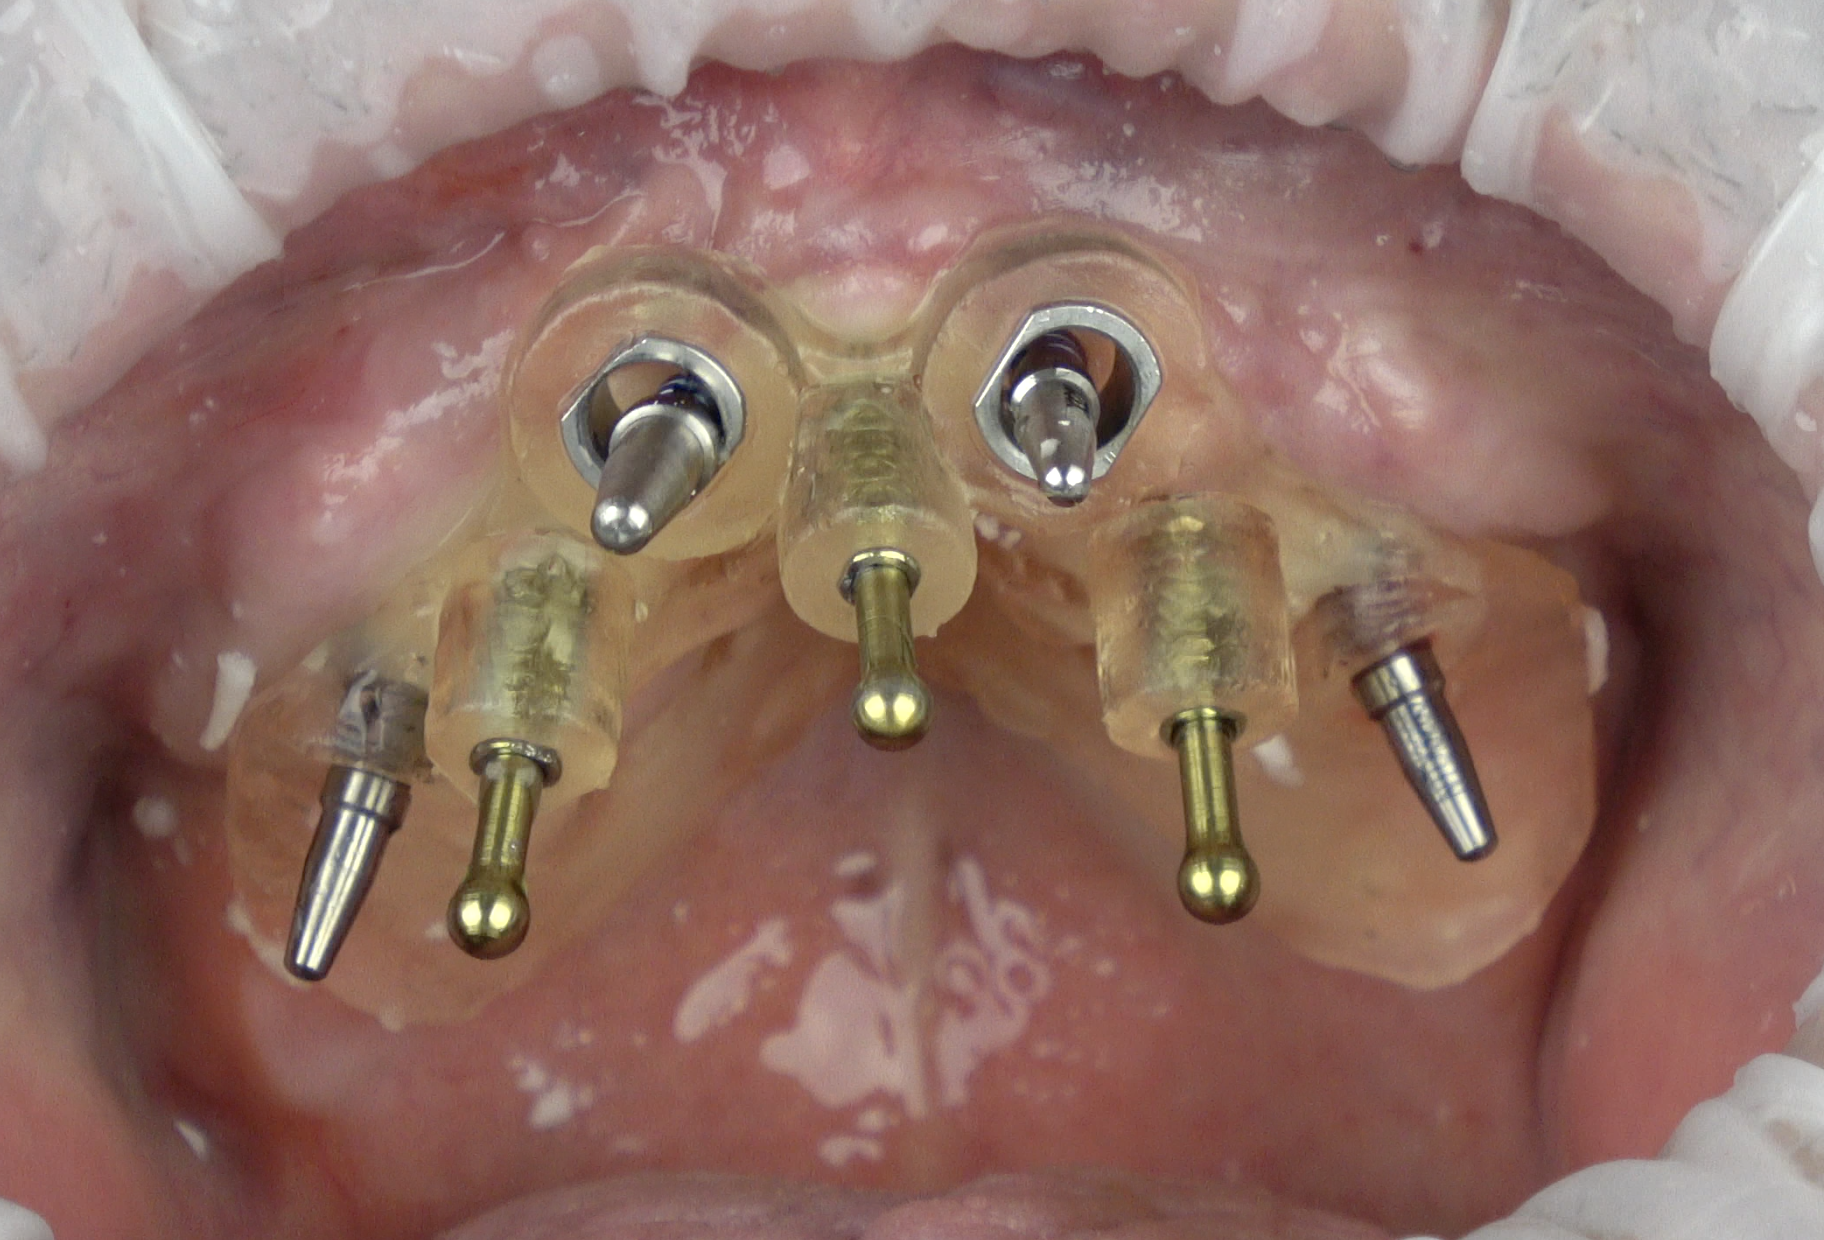 Fig. 9: Full-arch implant-supported rehabilitation with three bone anchor pins on the palate, two posterior sleeveless holes for 16-mm implants and two anterior sleeves for fully digital implant placement. Note that the buccal portion of the guide was cut in postproduction to allow visibility of the surgical field